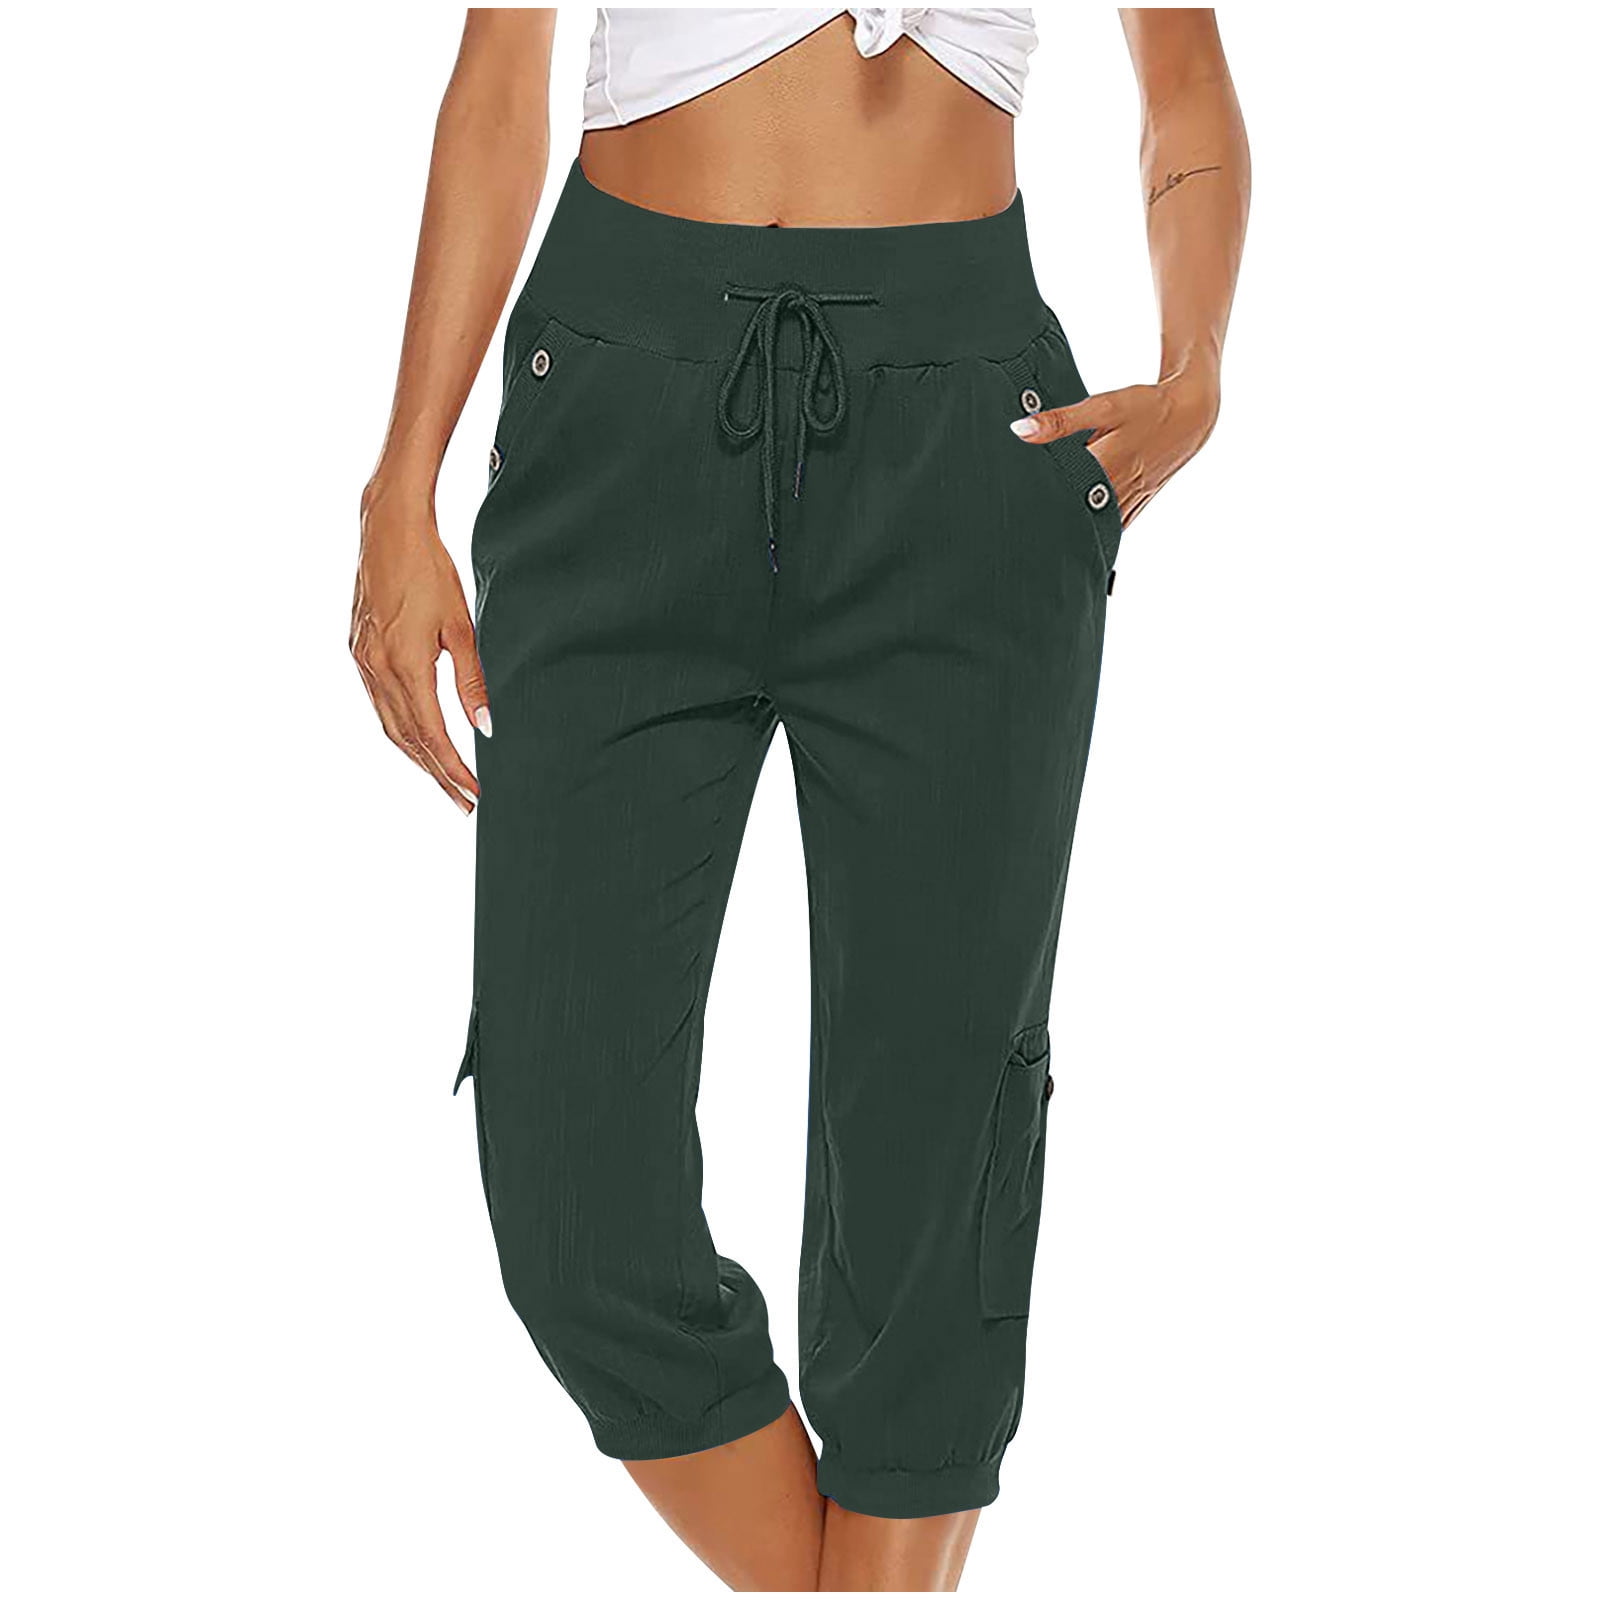  HAENPISY Yoga Capri Leggings for Women Jogger High Waist  Drawstring Pants with Pockets Running Tights Workout Sweatpants (Small,  Army Green) : Clothing, Shoes & Jewelry